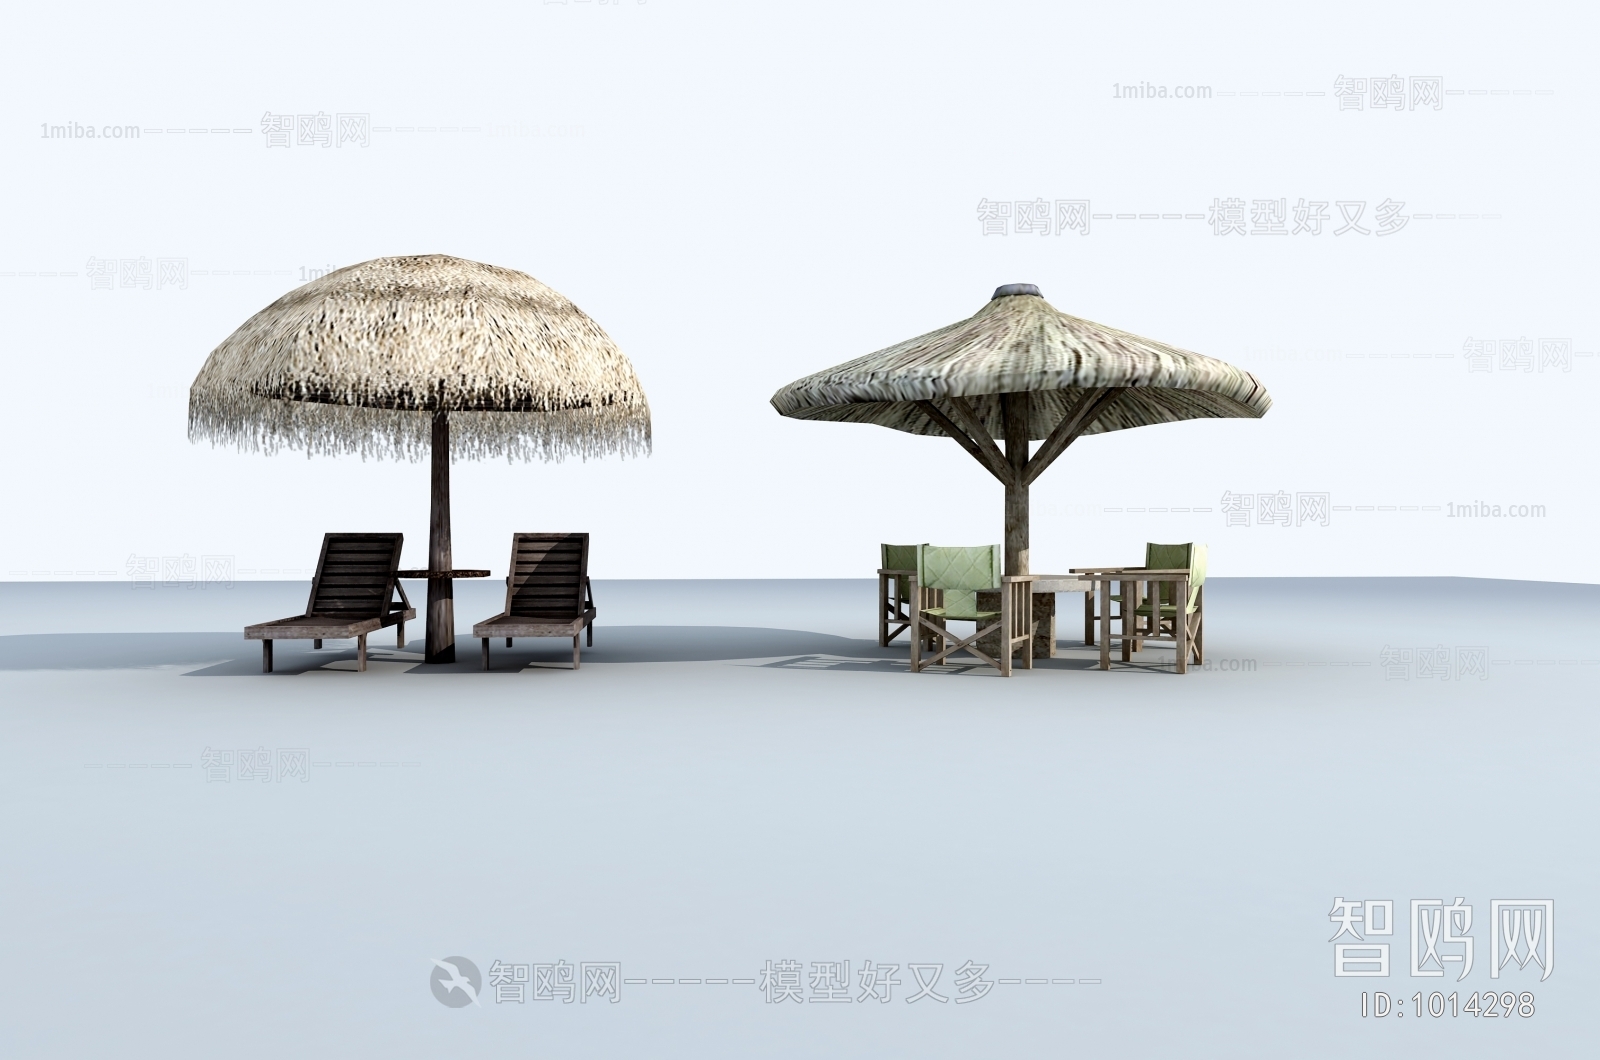 Chinese Style Outdoor Tables And Chairs